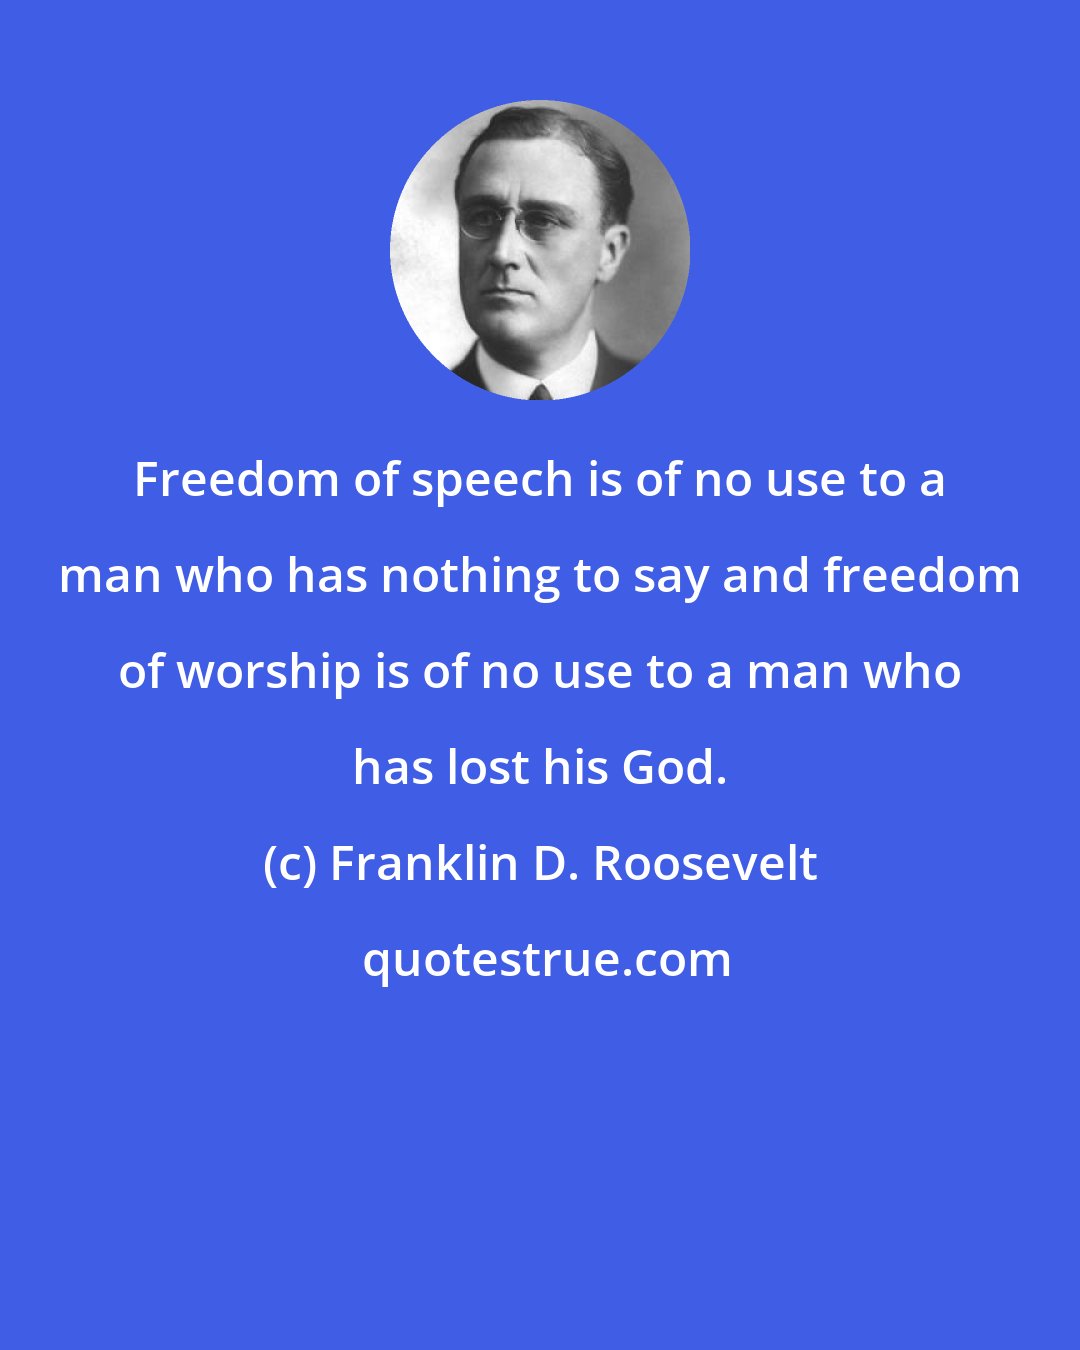 Franklin D. Roosevelt: Freedom of speech is of no use to a man who has nothing to say and freedom of worship is of no use to a man who has lost his God.